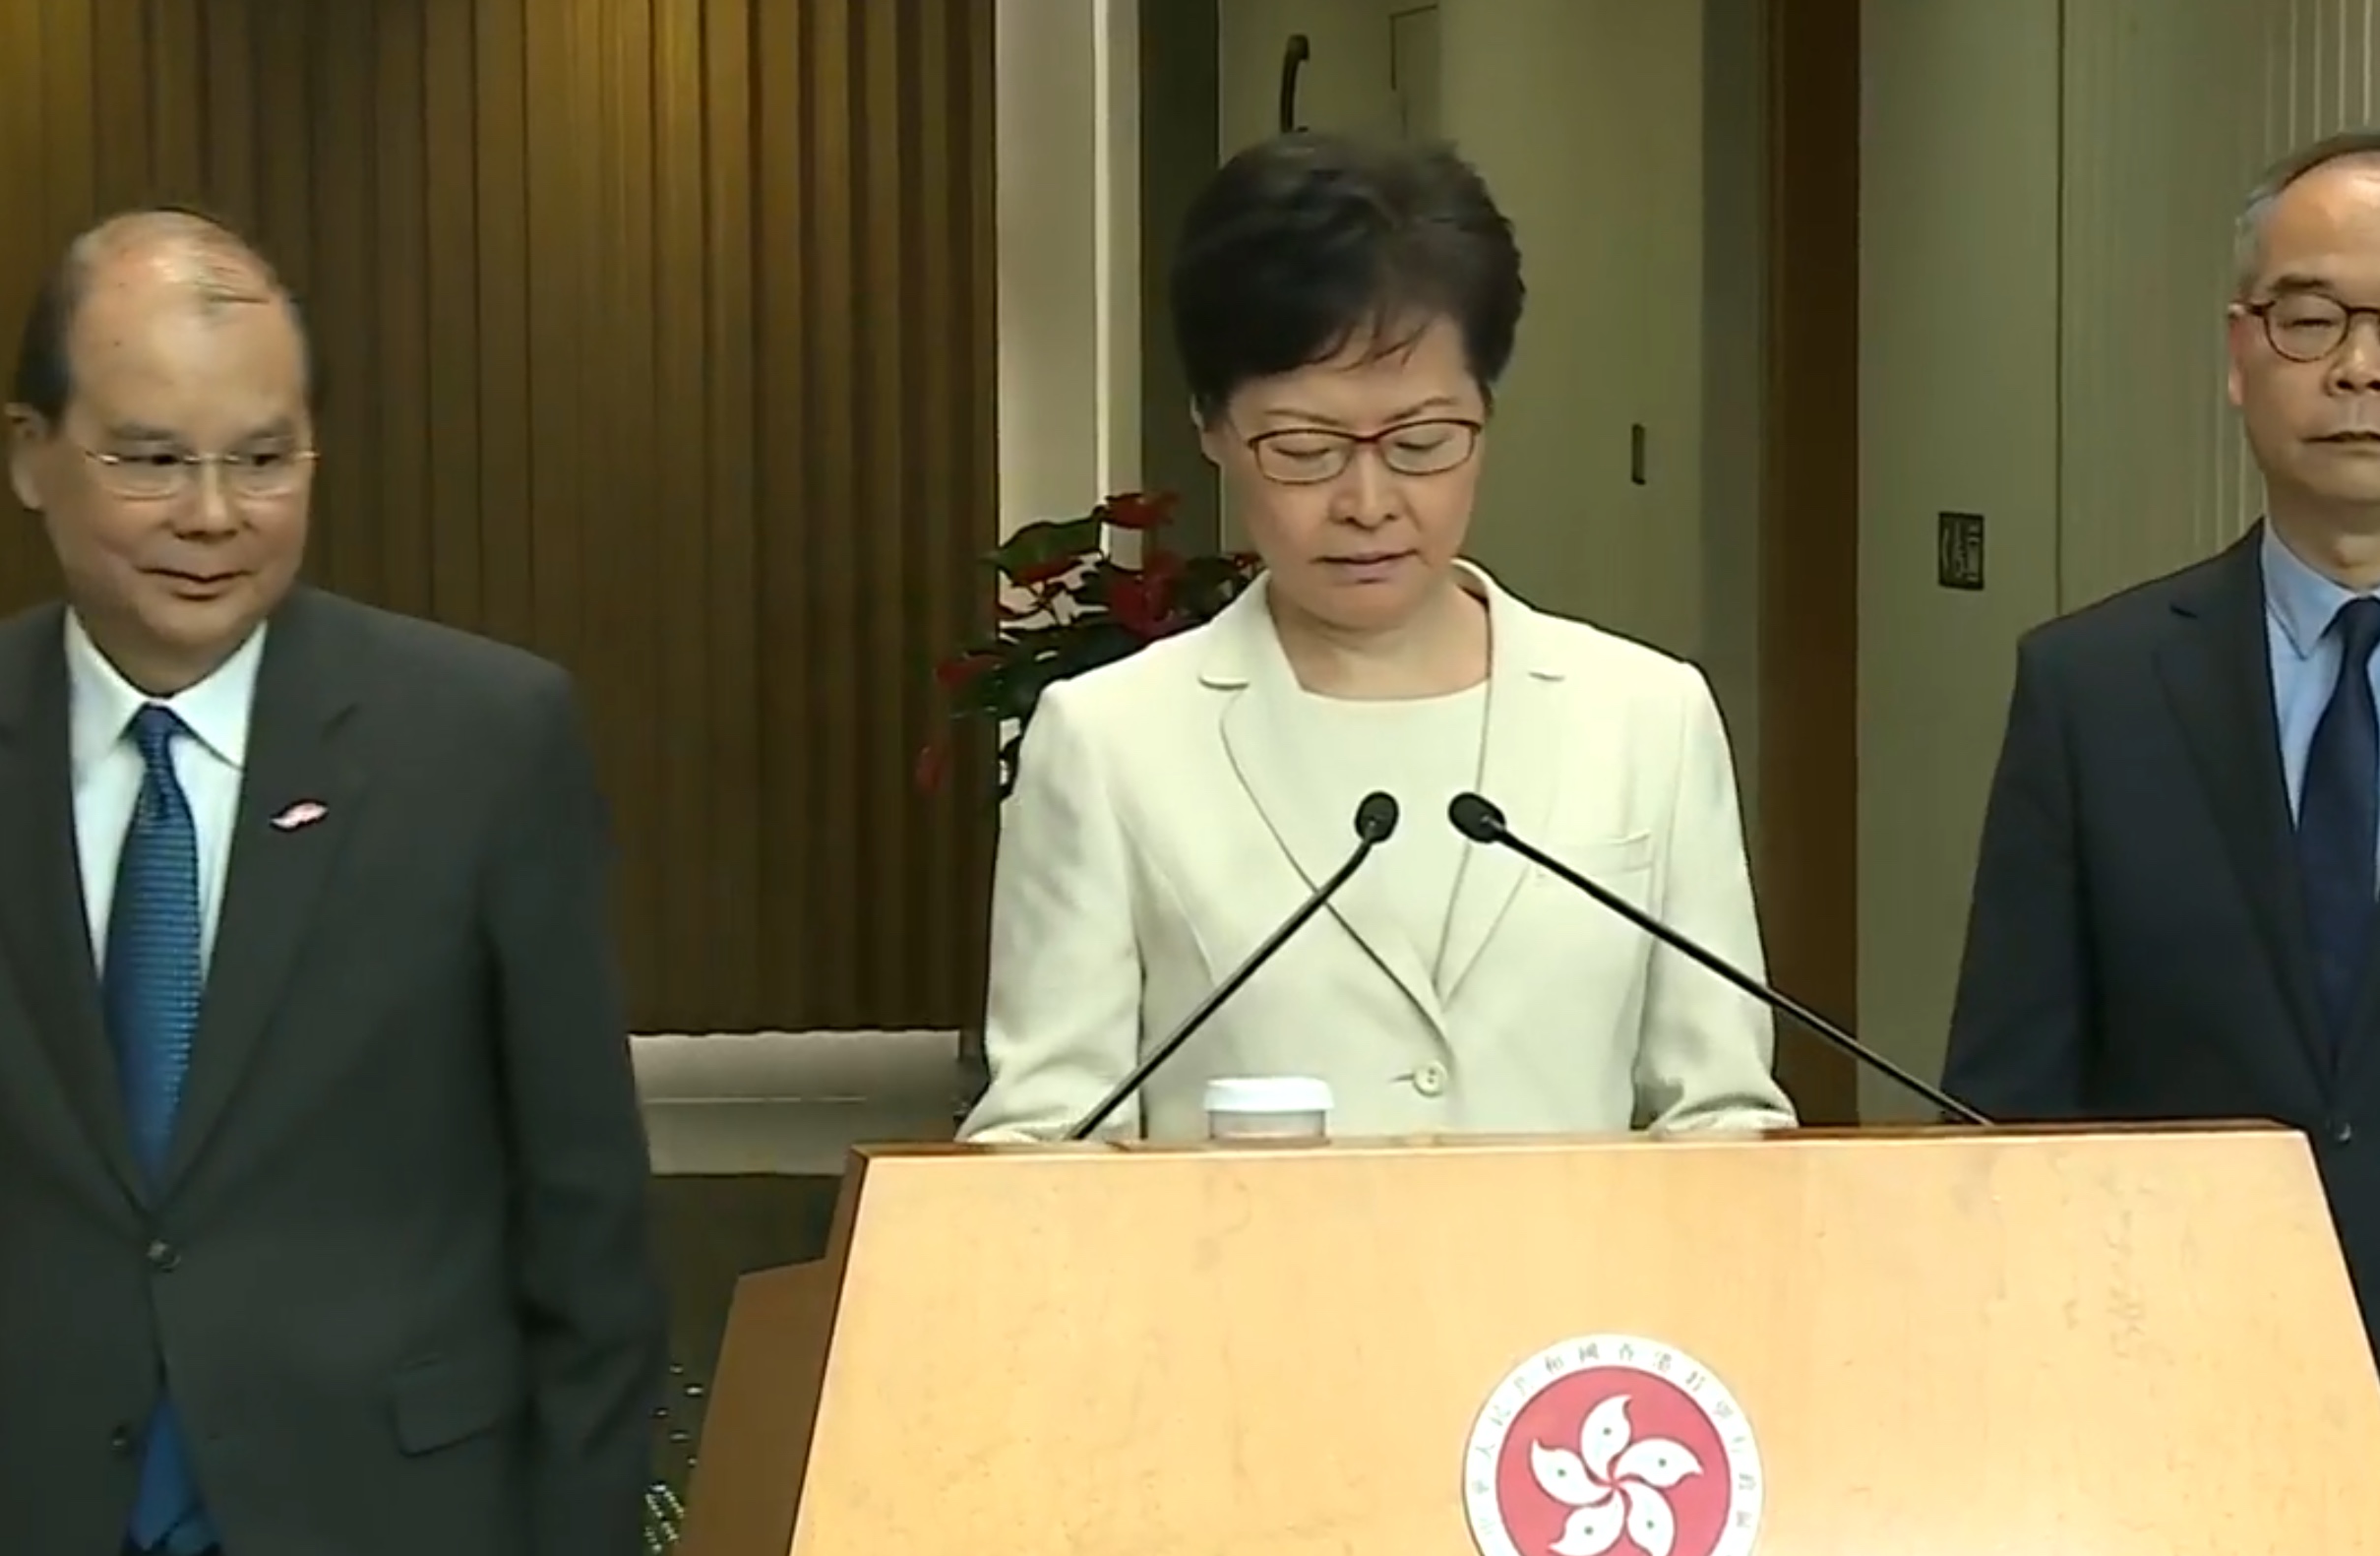 Chief Executive Carrie Lam speaks to the press this morning after her surprise withdrawal of a despised extradition bill last night. Screengrab via Facebook/RTHK.